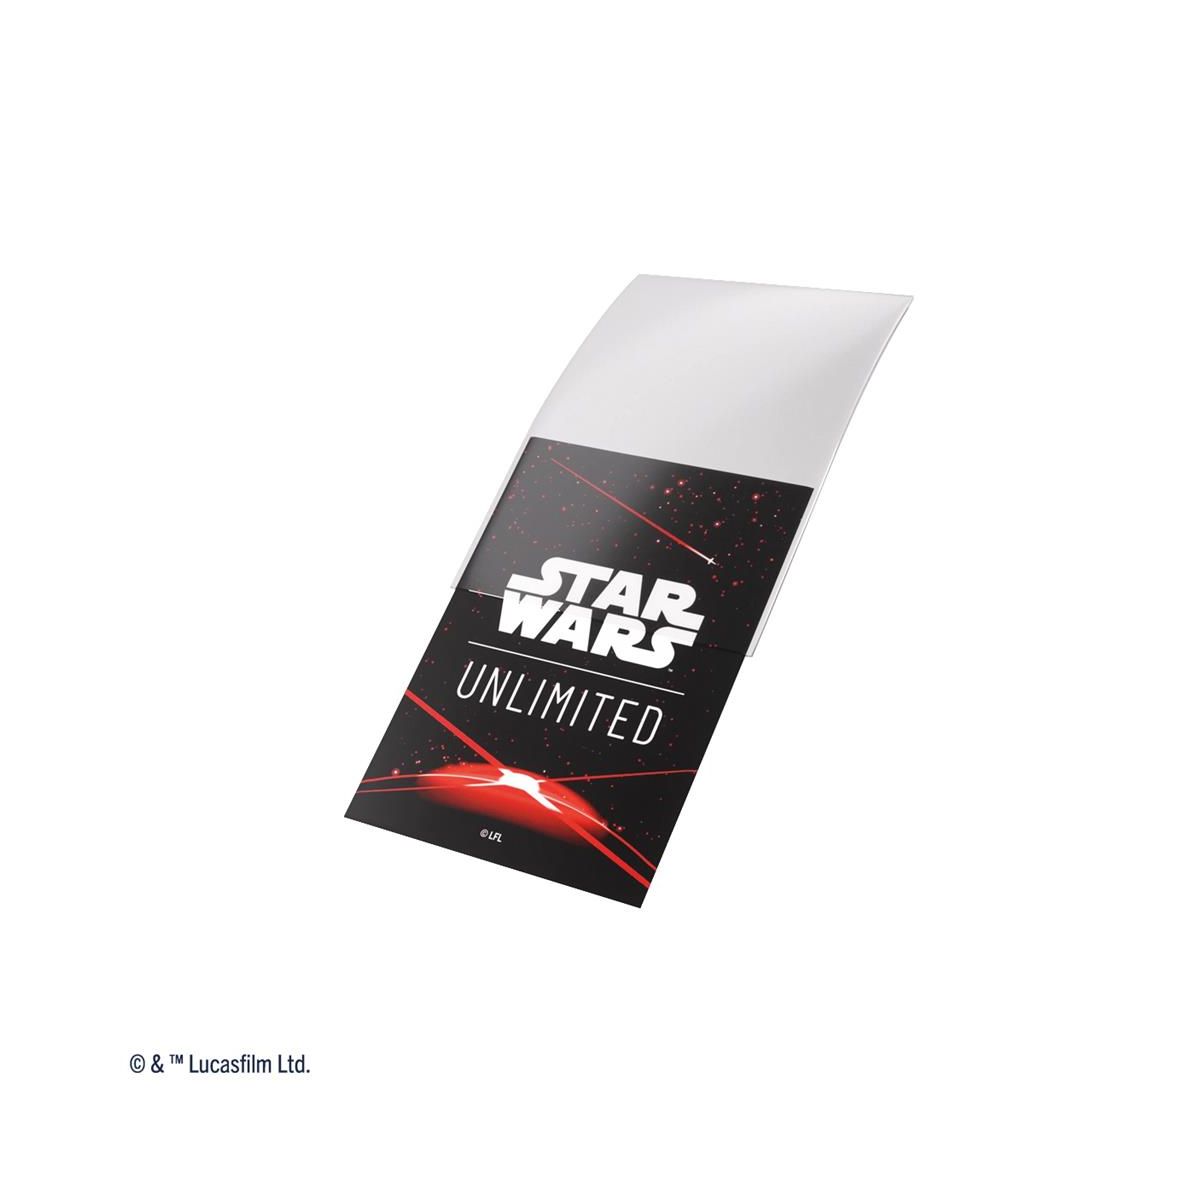 Gamegenic - Protèges Cartes - Standard - Double Sleeves Pack - Star Wars : Unlimited - Space Red - FR